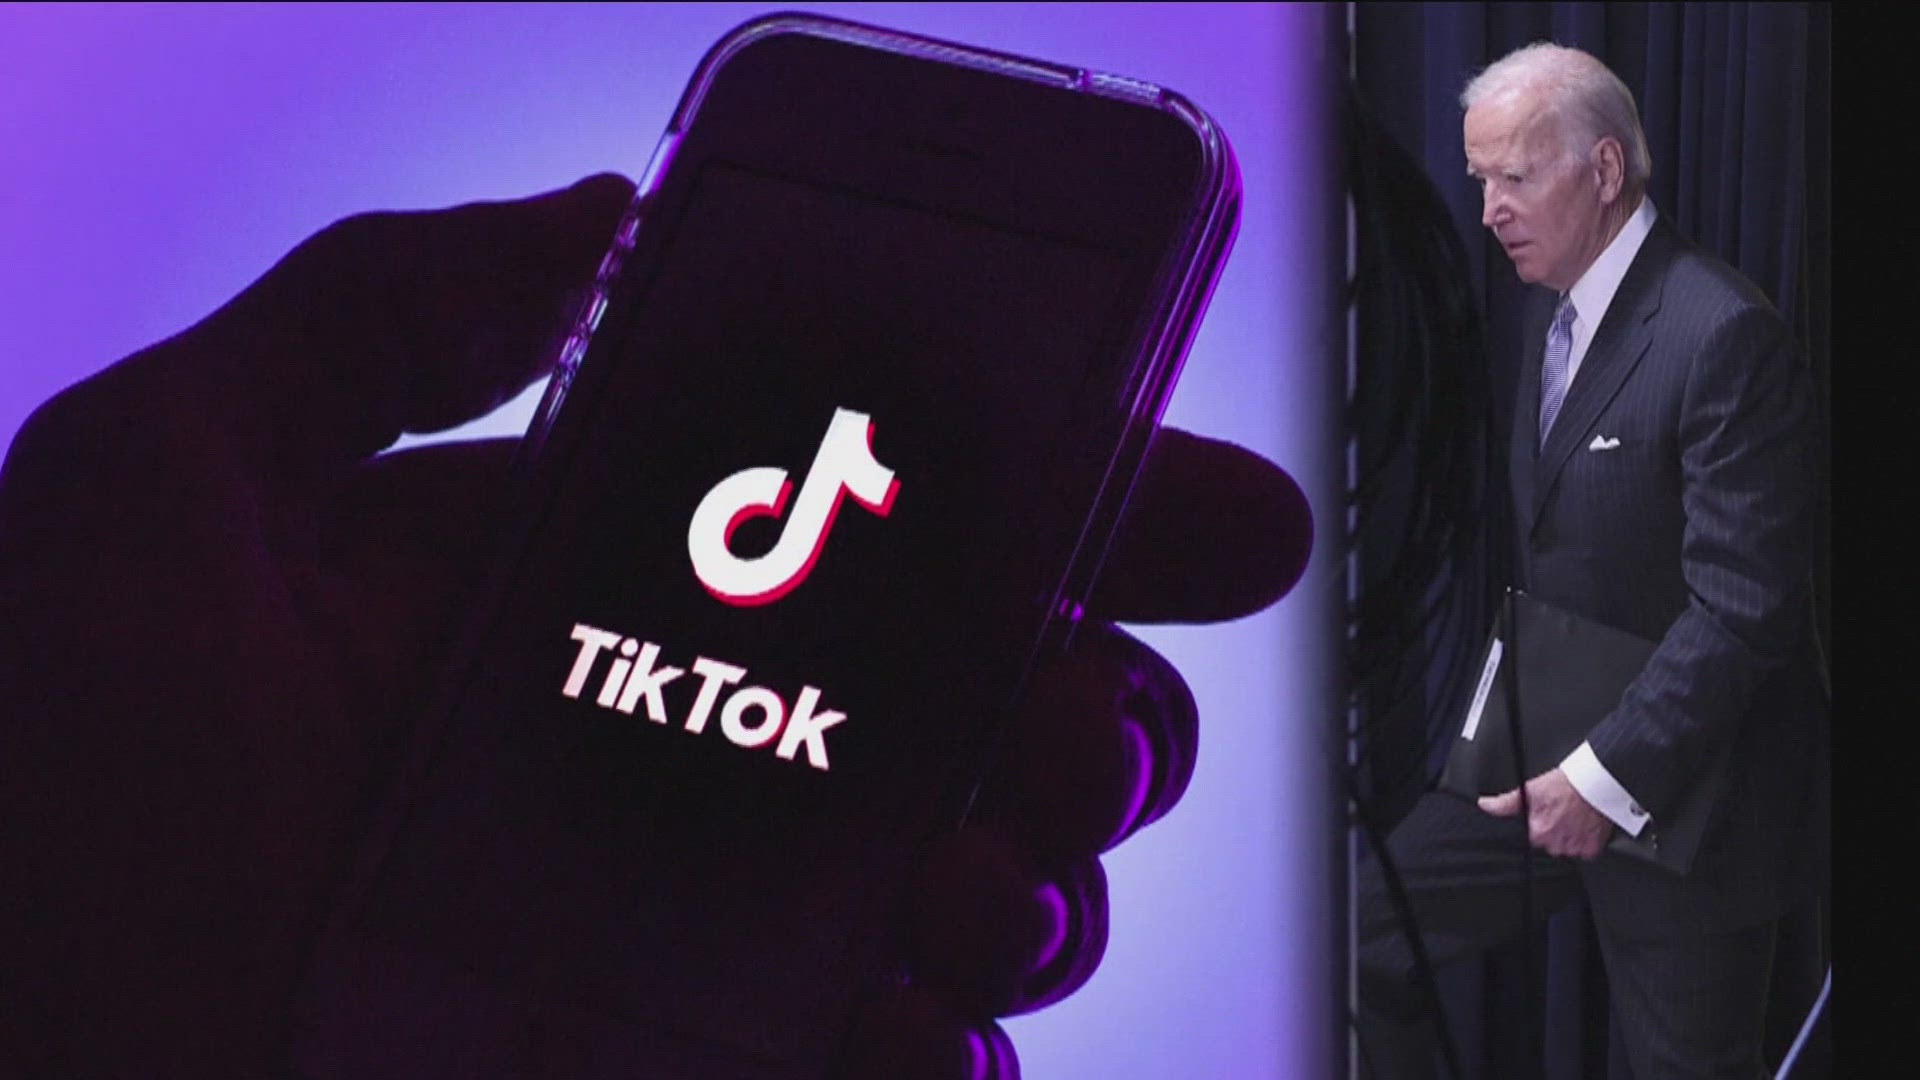 TikTok will be banned in the United States, if it's not sold within a year.